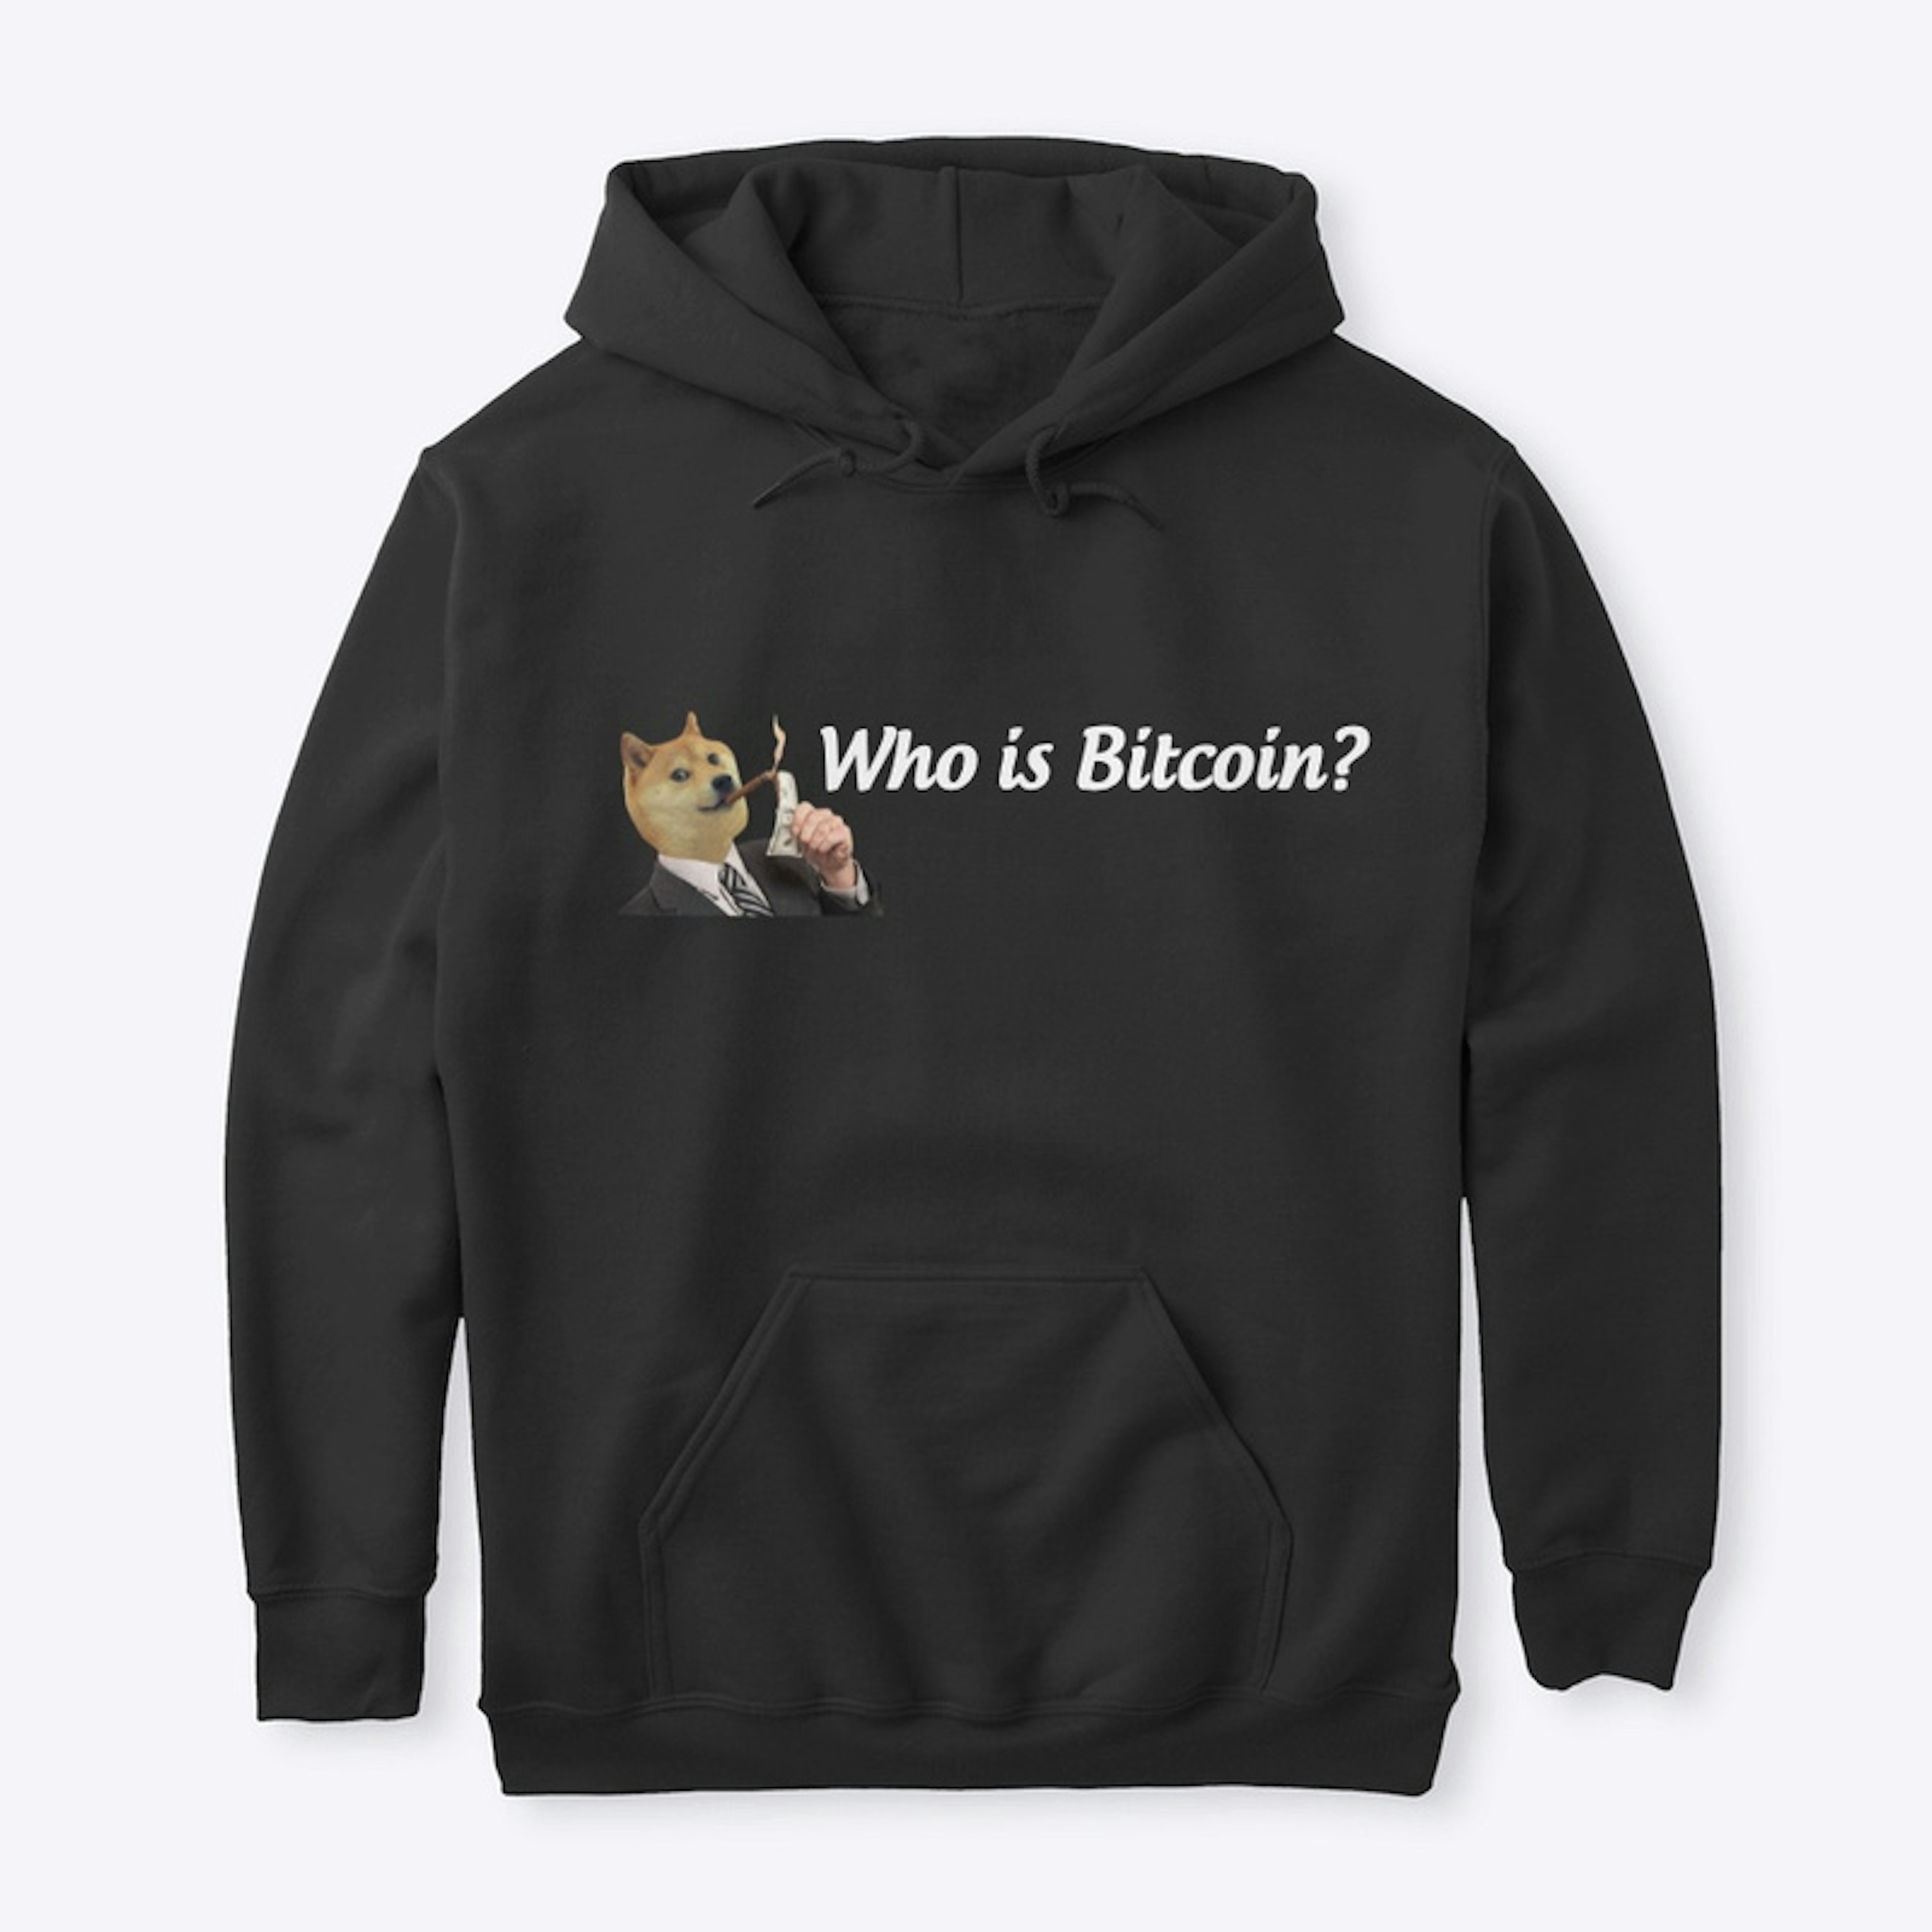 Who ist Bitcoin motherf!cker